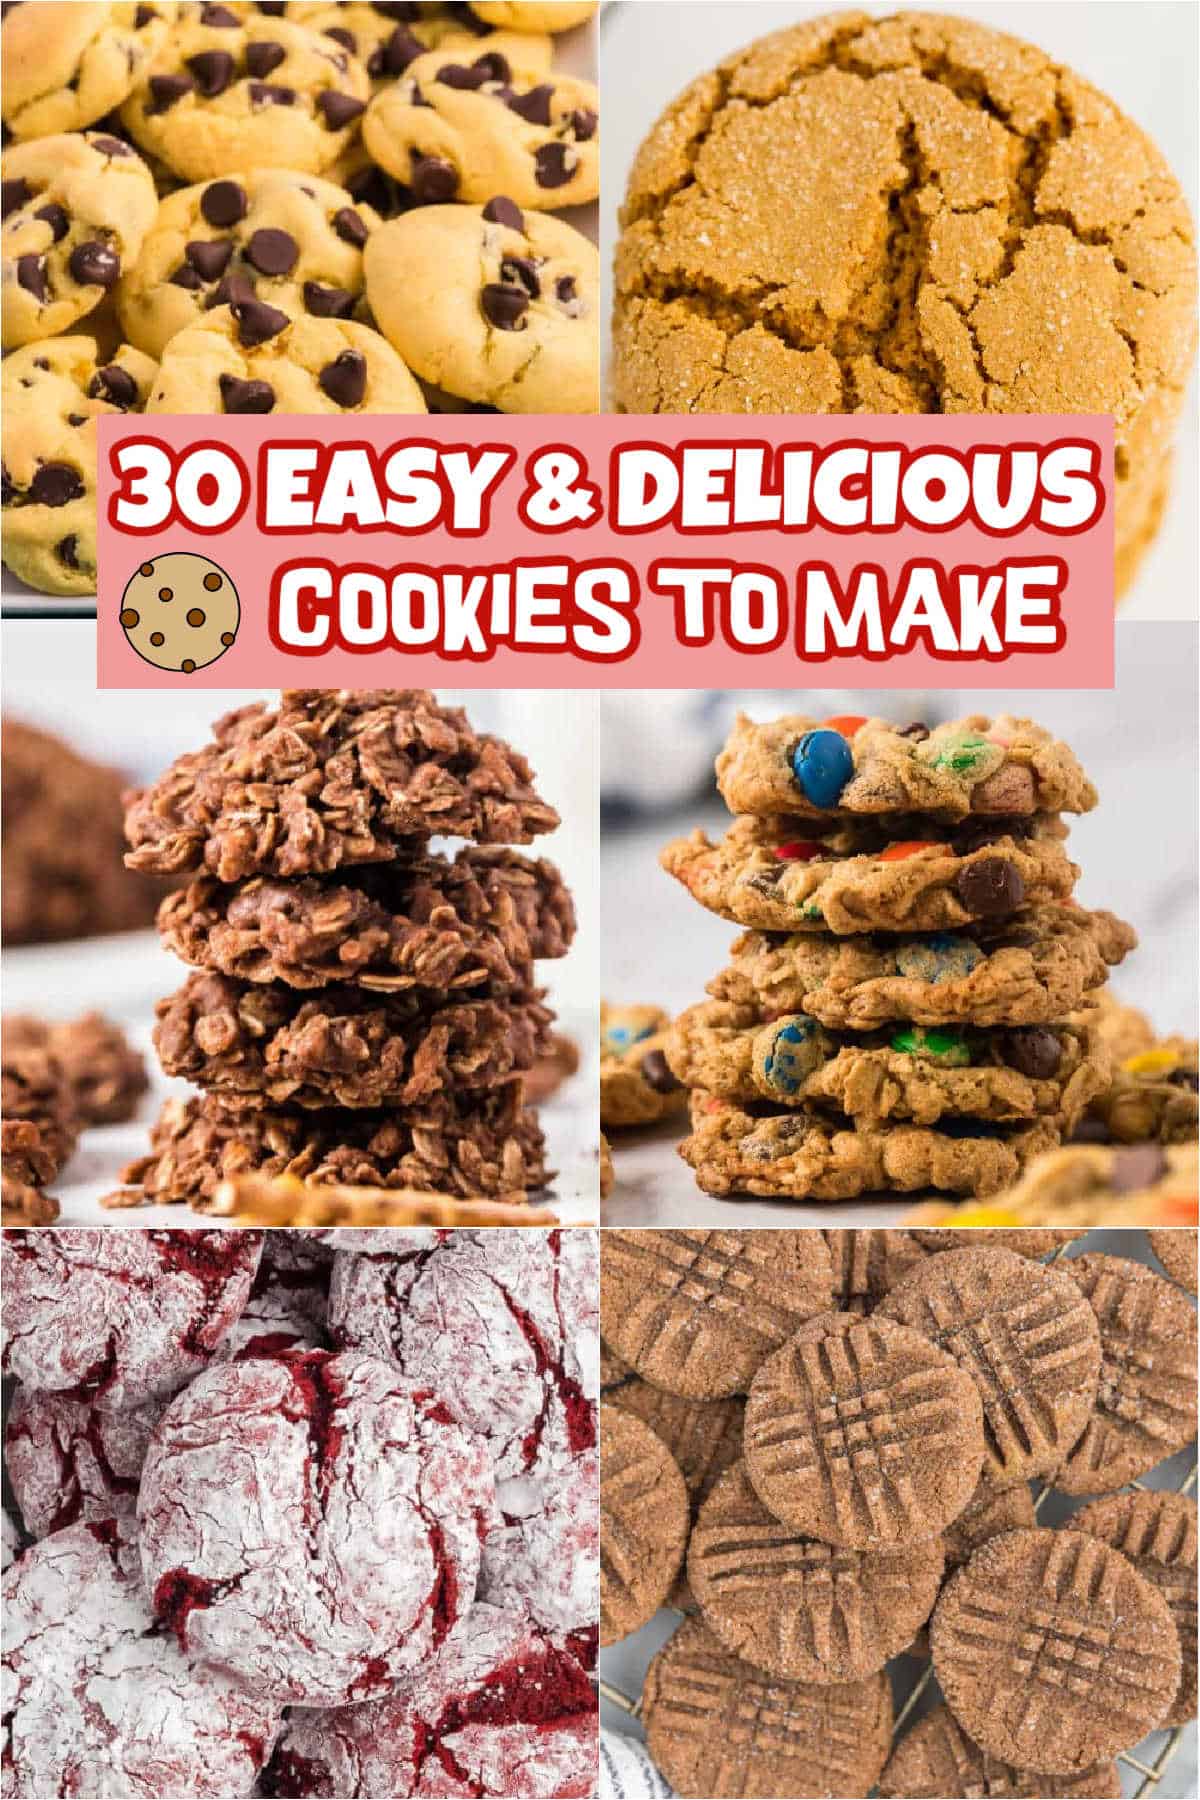 Small images of chocolate chip cookies, snickerdoodle cookies, no bake cookies, monster cookies, red velvet cookies, chocolate peanut butter cookies